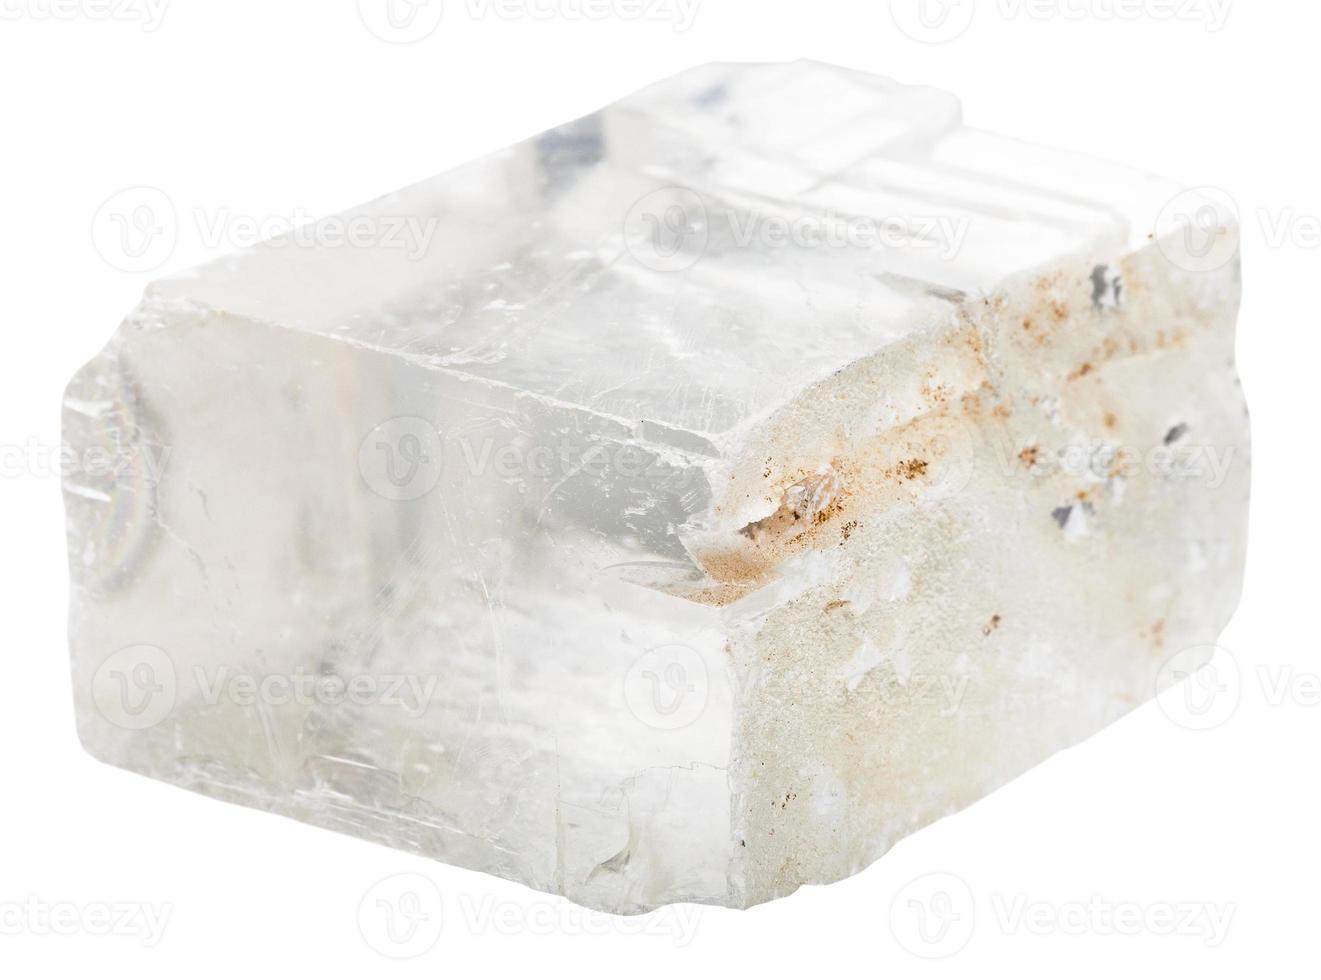 iceland spar mineral stone isolated on white photo